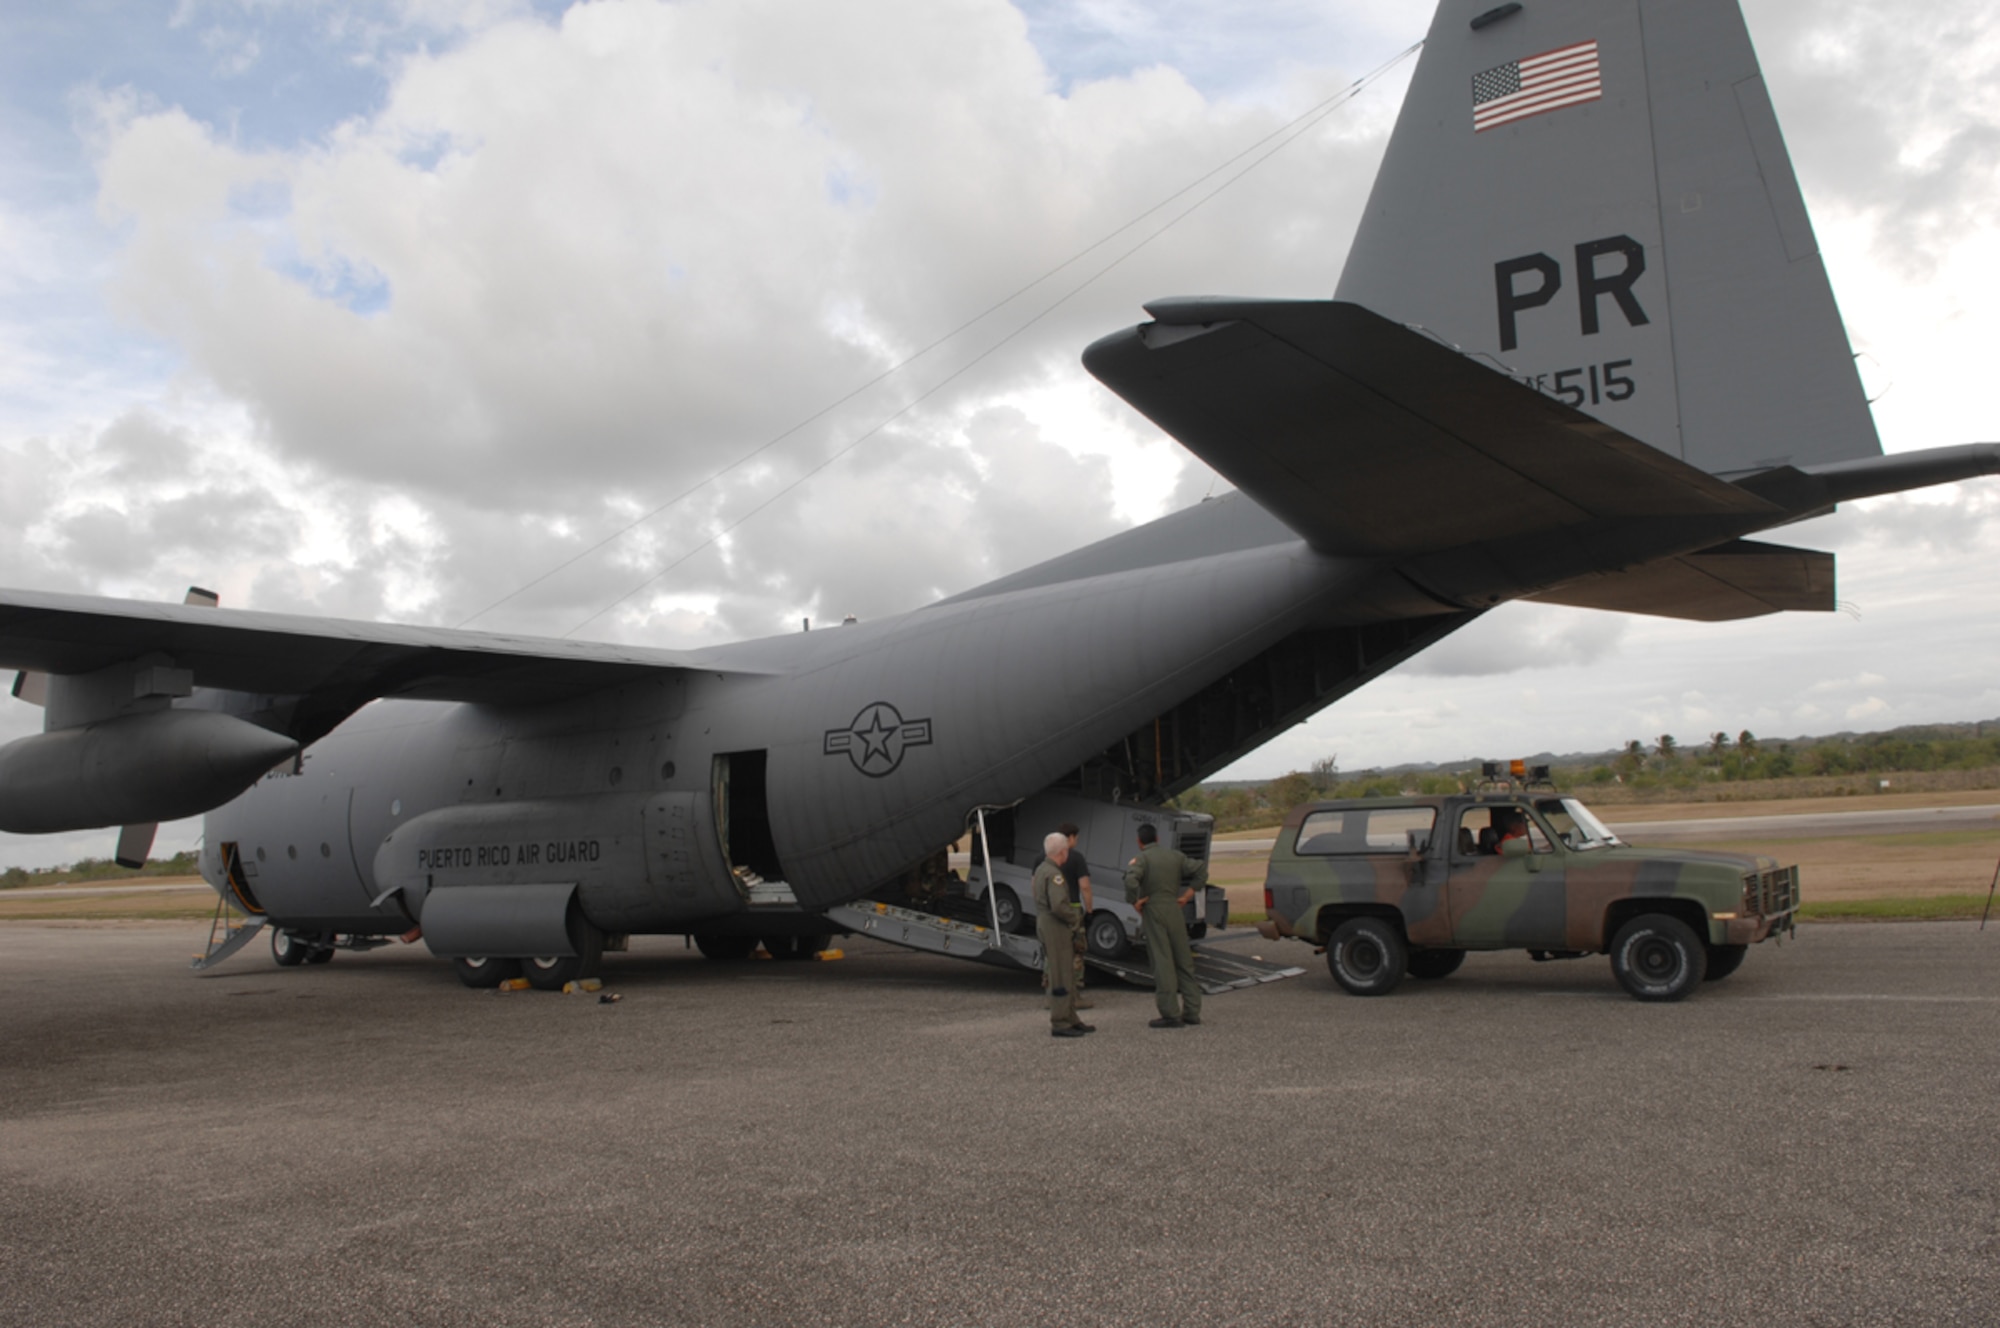 Mobile lighting units are loaded onto a C-130H Hercules from Muniz Air National Guard Base, Puerto Rico, during Patriot Hoover 2009 at Ramey airfield in Aguadilla, Puerto Rico, April 30, 2009. Patriot Hoover 2009 is a large-scale air mobility exercise involving units from Air Force Reserve Command, the Puerto Rico Air National Guard and the FBI. (U.S. Air Force photo/Staff Sgt Daniel St. Pierre)